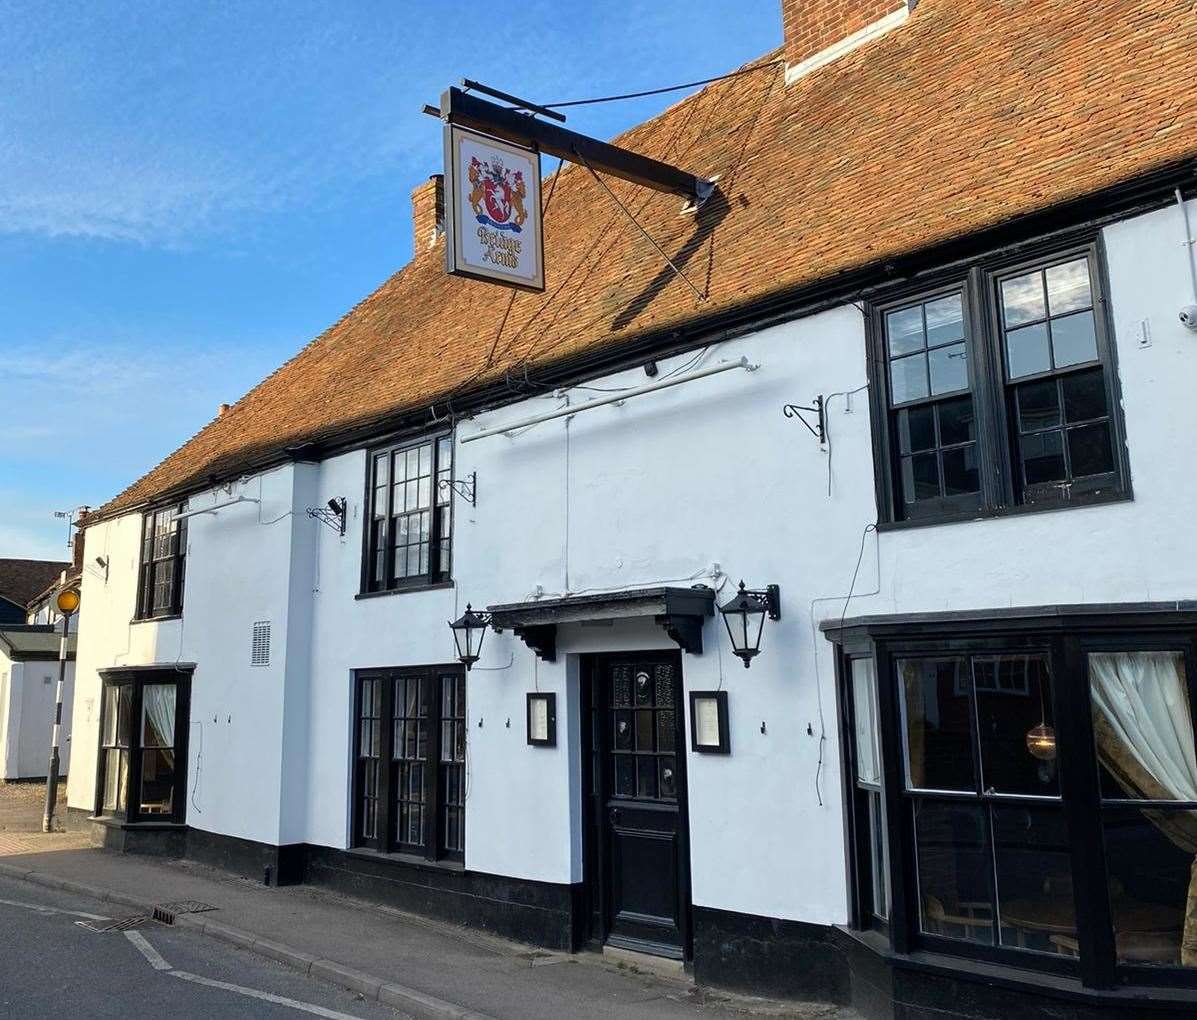 The former White Horse has been given a new lease of life